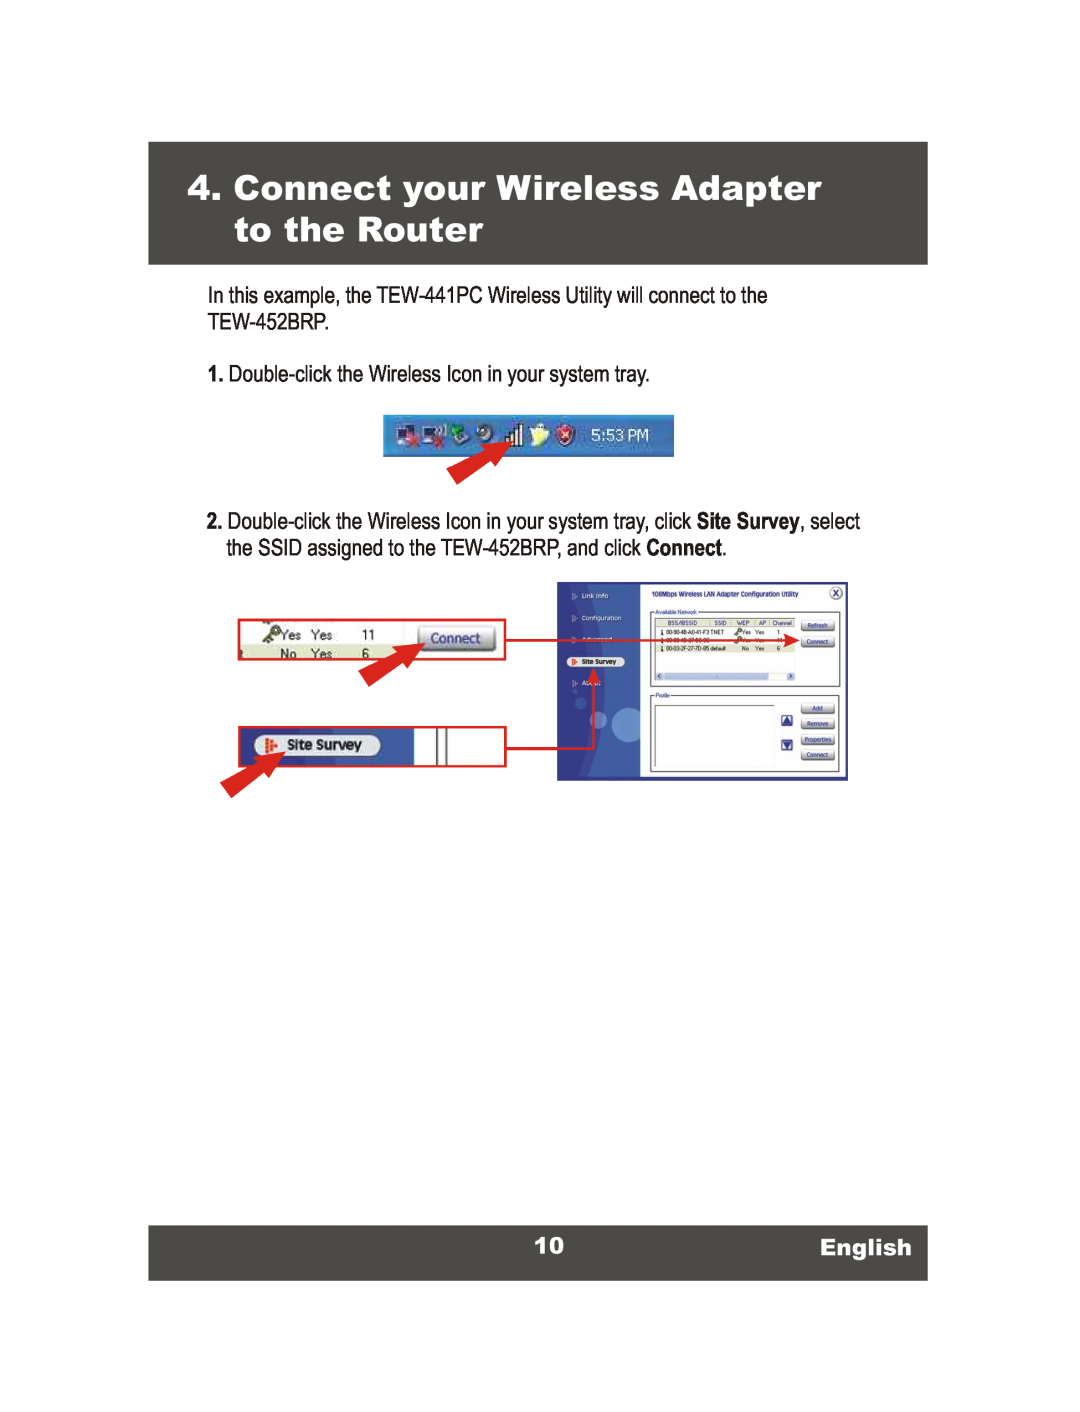 TRENDnet TEW-452BRP, 108Mbps Wireless Super G Broadband Router manual Connect your Wireless Adapter to the Router, 10English 